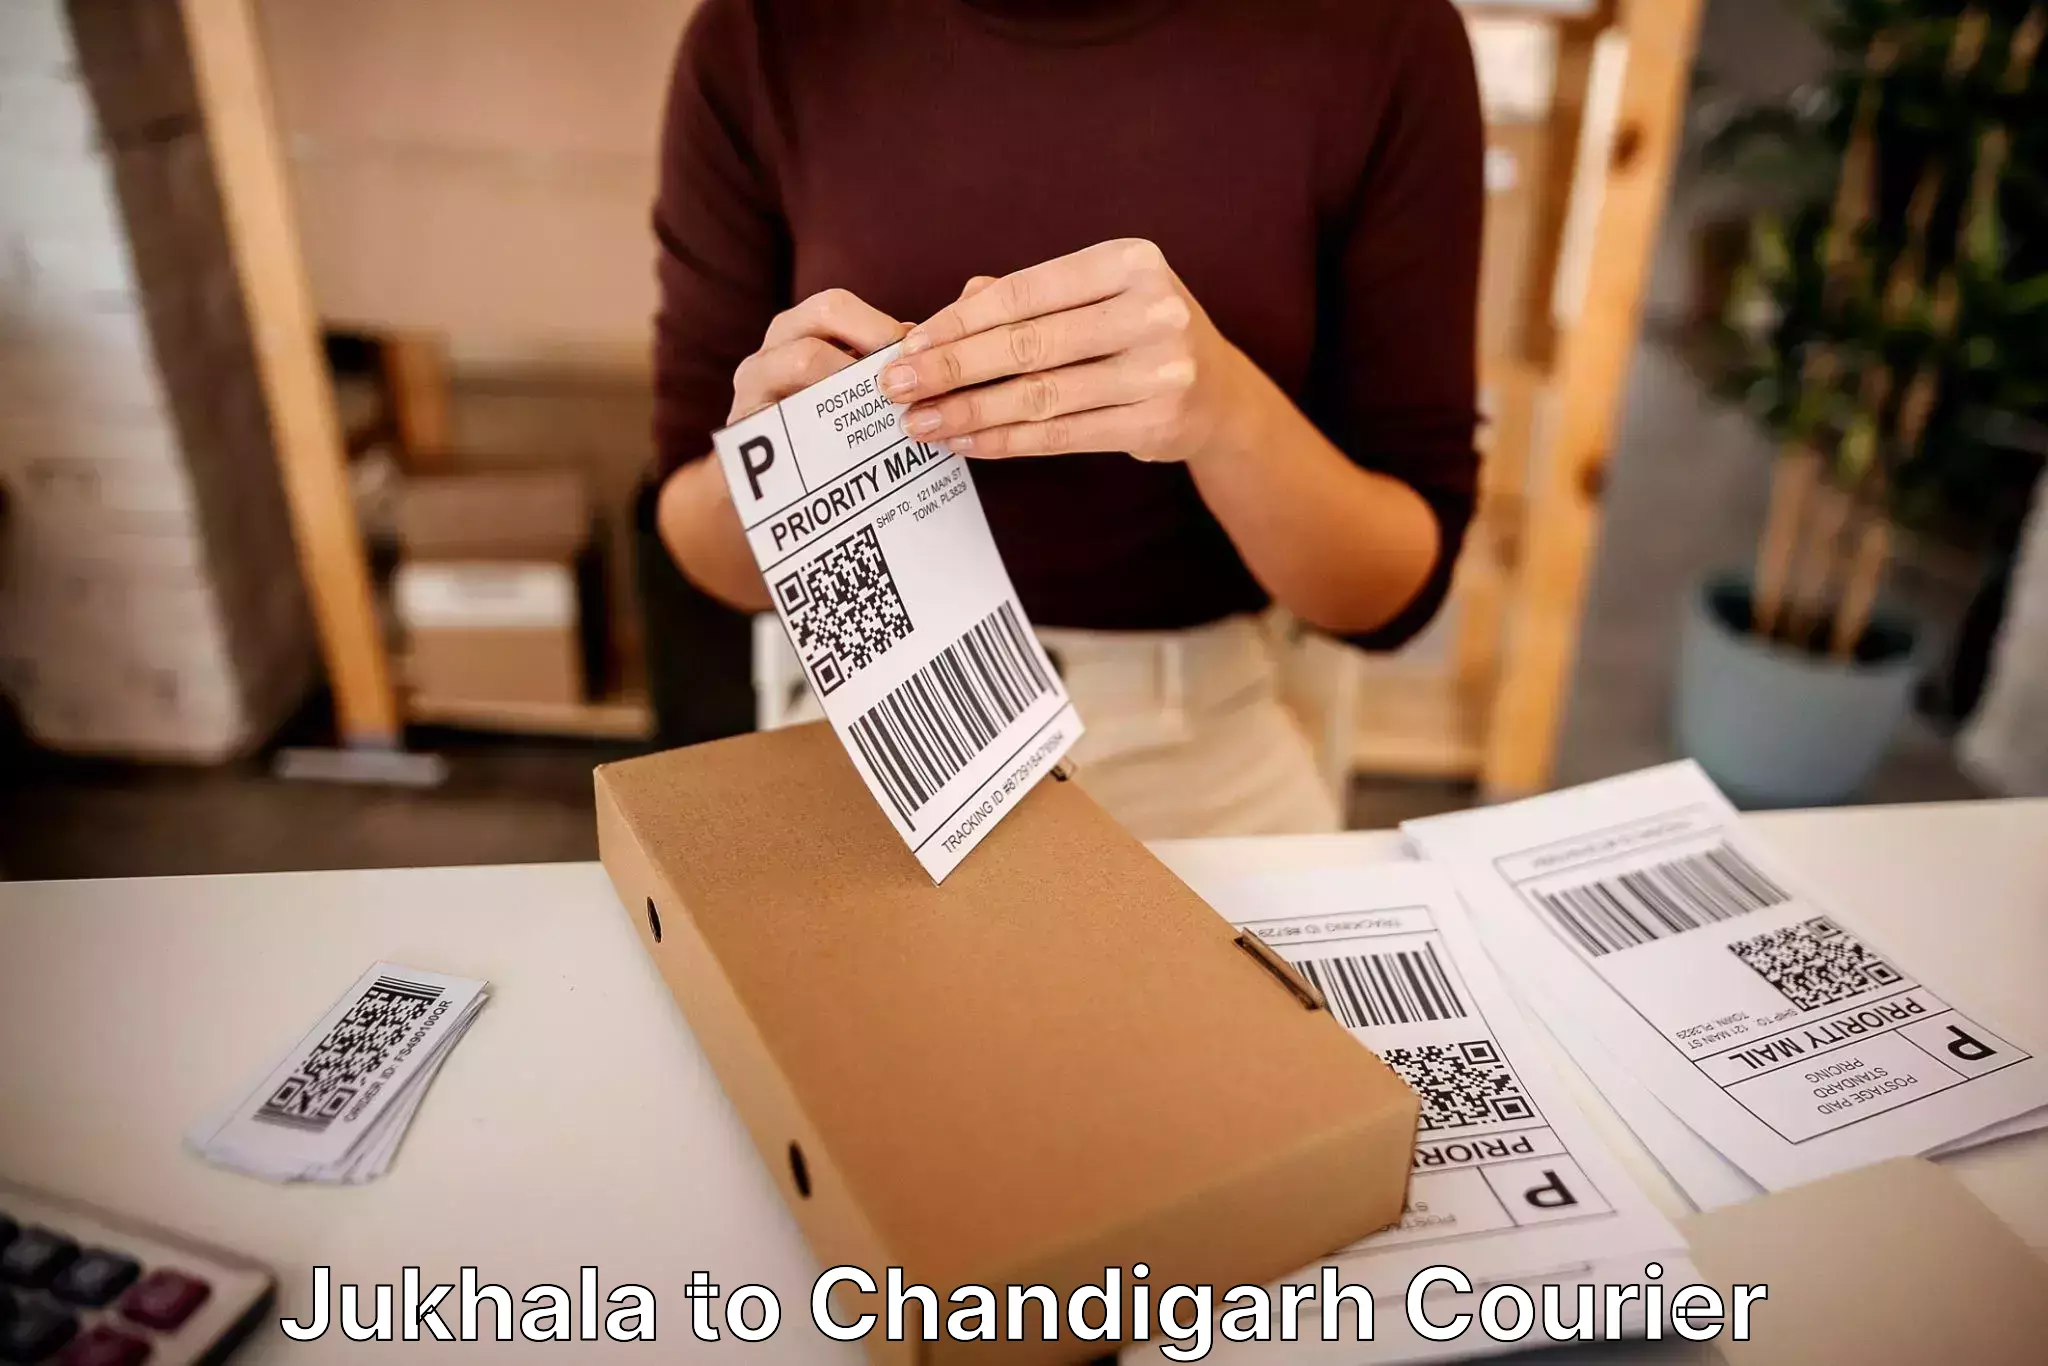 Home relocation and storage Jukhala to Chandigarh